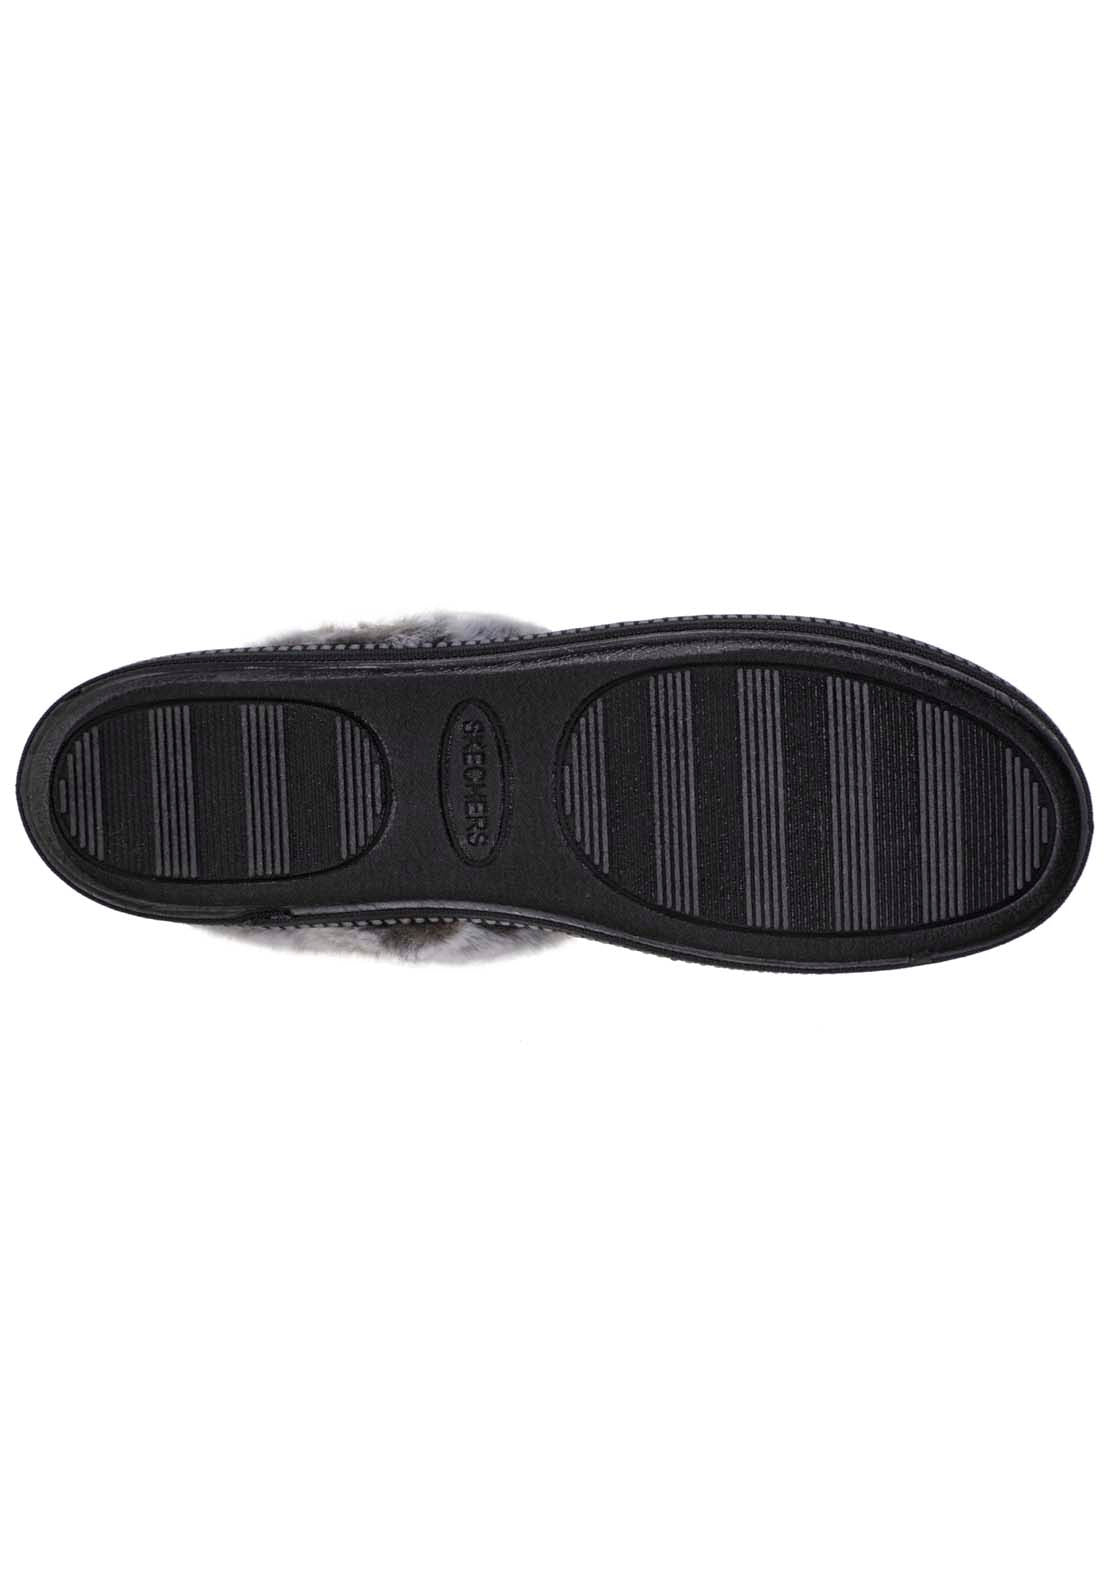 Skechers Cosy Campfire Slipper - Black 5 Shaws Department Stores